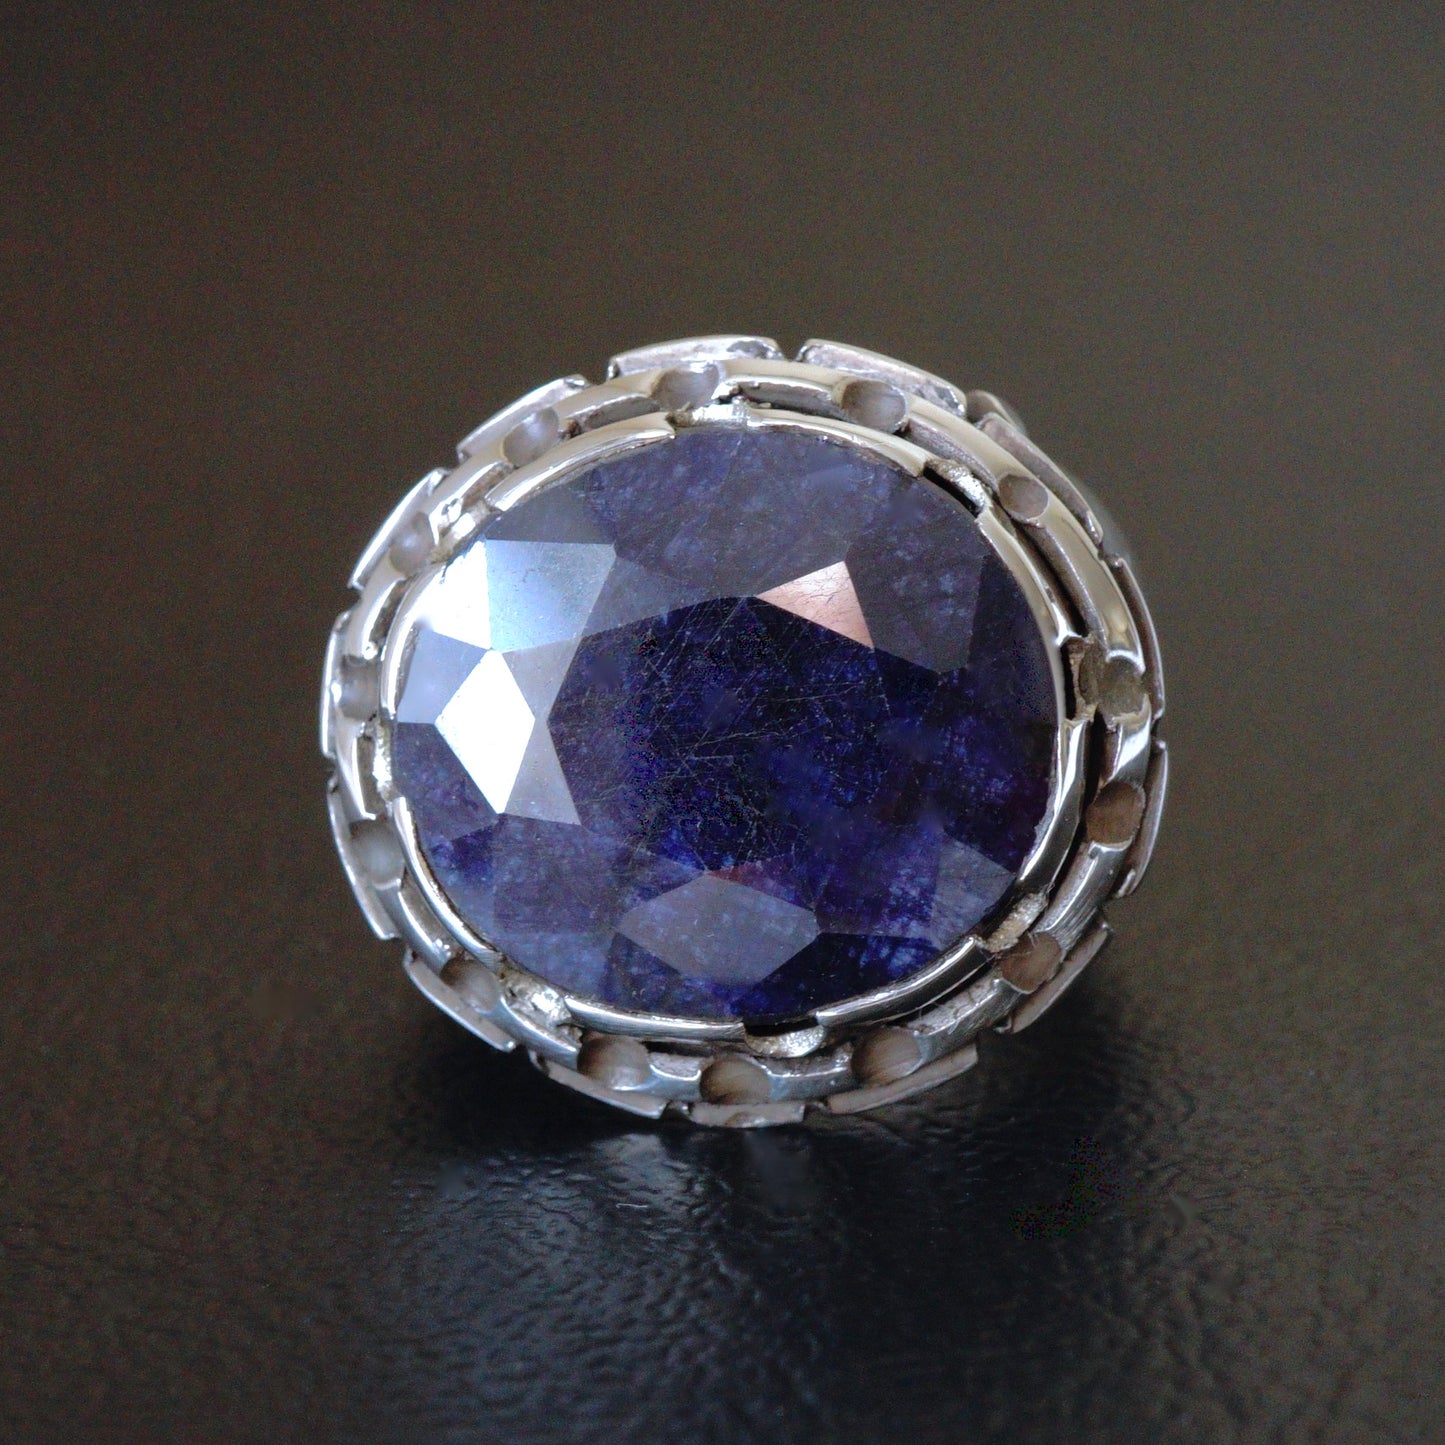 Mens Handmade Ring Raw Sapphire Gemstone Solid Sterling Silver Unique Vintage Jewelry